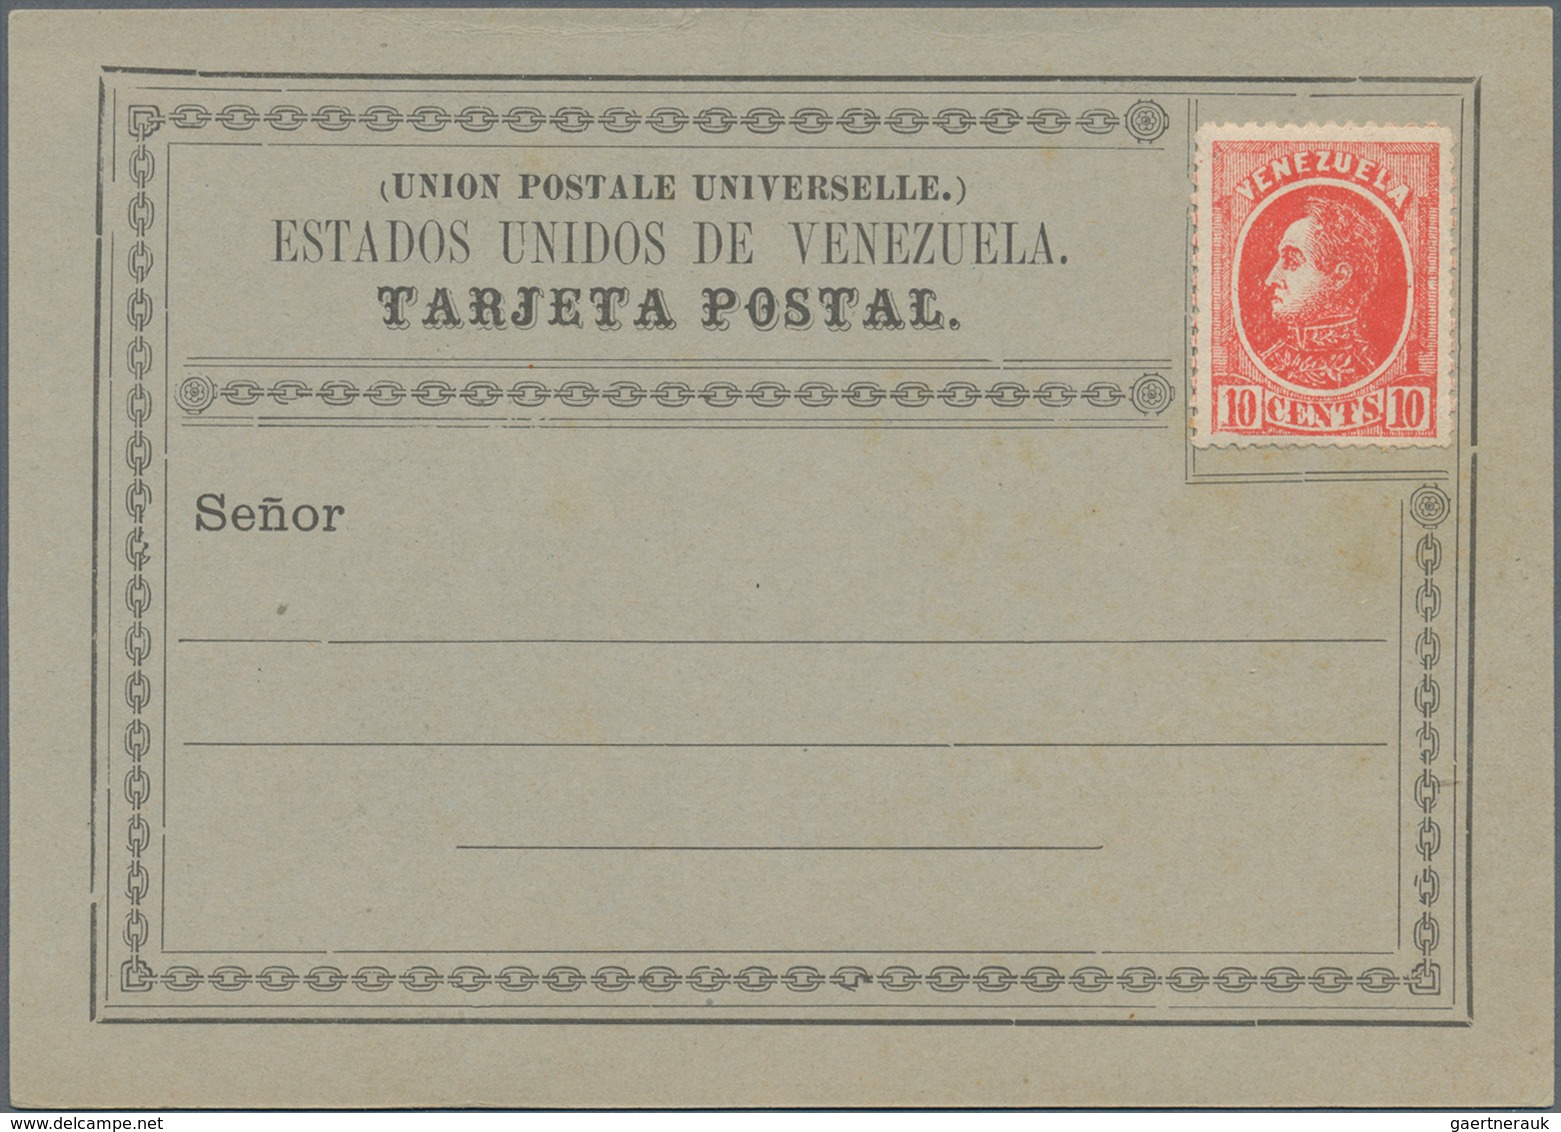 Venezuela - Ganzsachen: 1880/84 Ca. 40 Unused Form Cards From Old American Stock, Highly Specialized - Venezuela